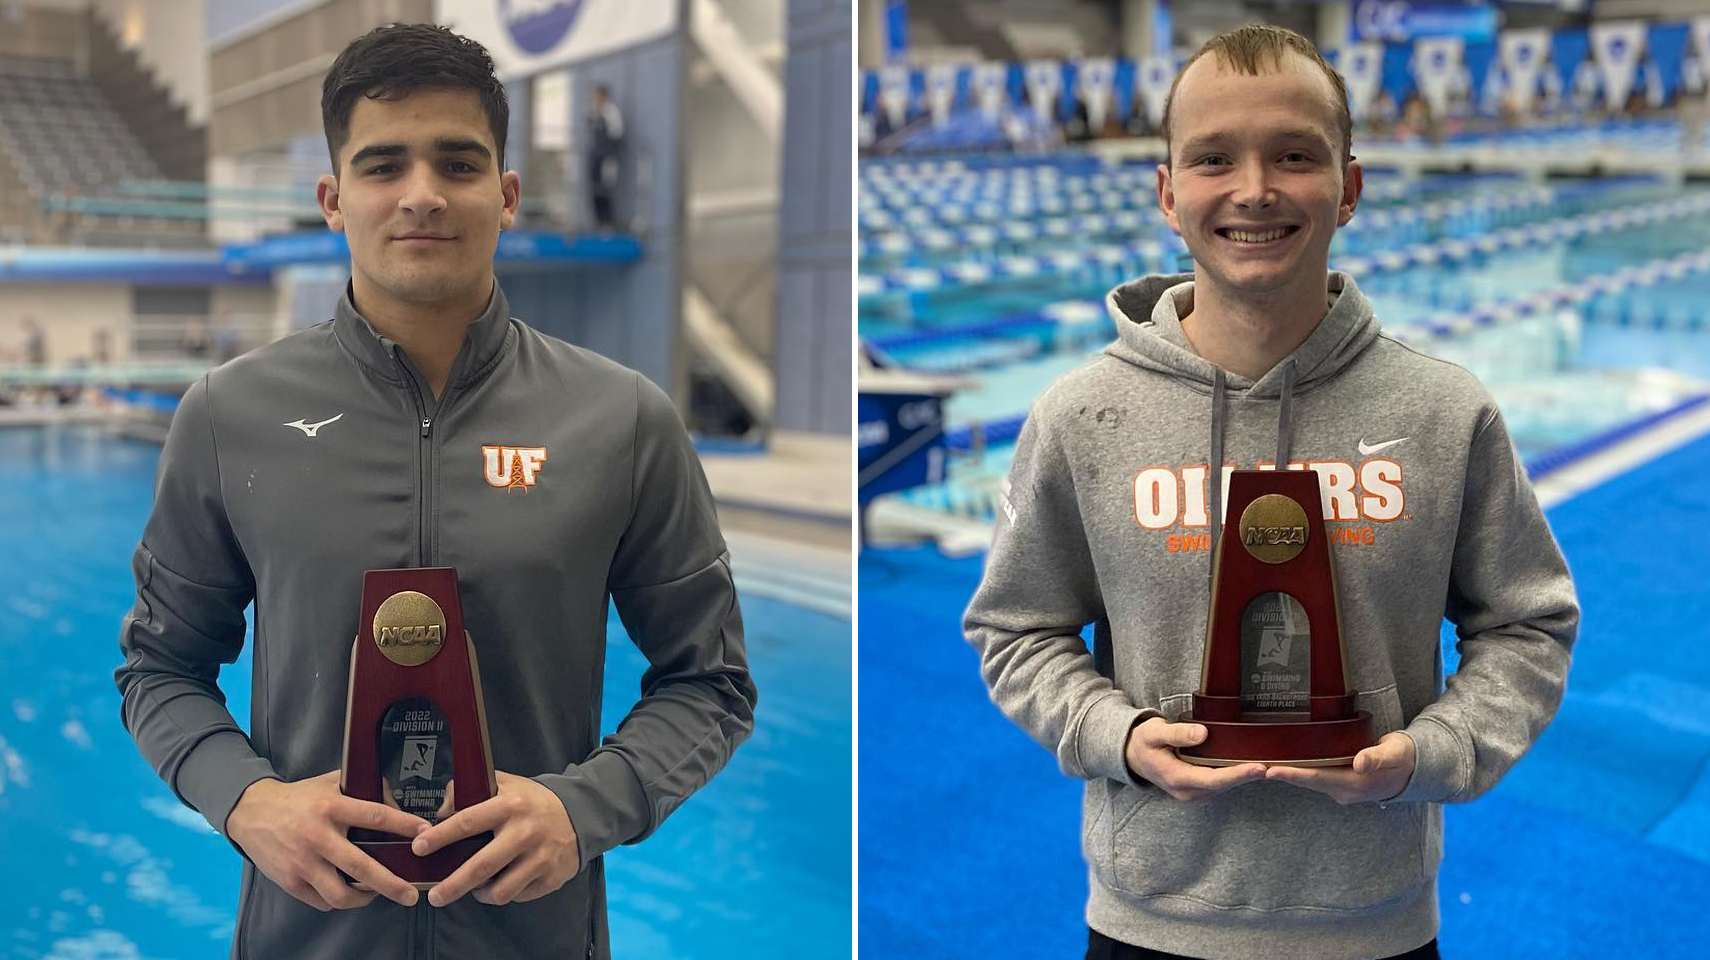 Oilers Pick Up Two More All-American Awards | Team in 7th at National Championship